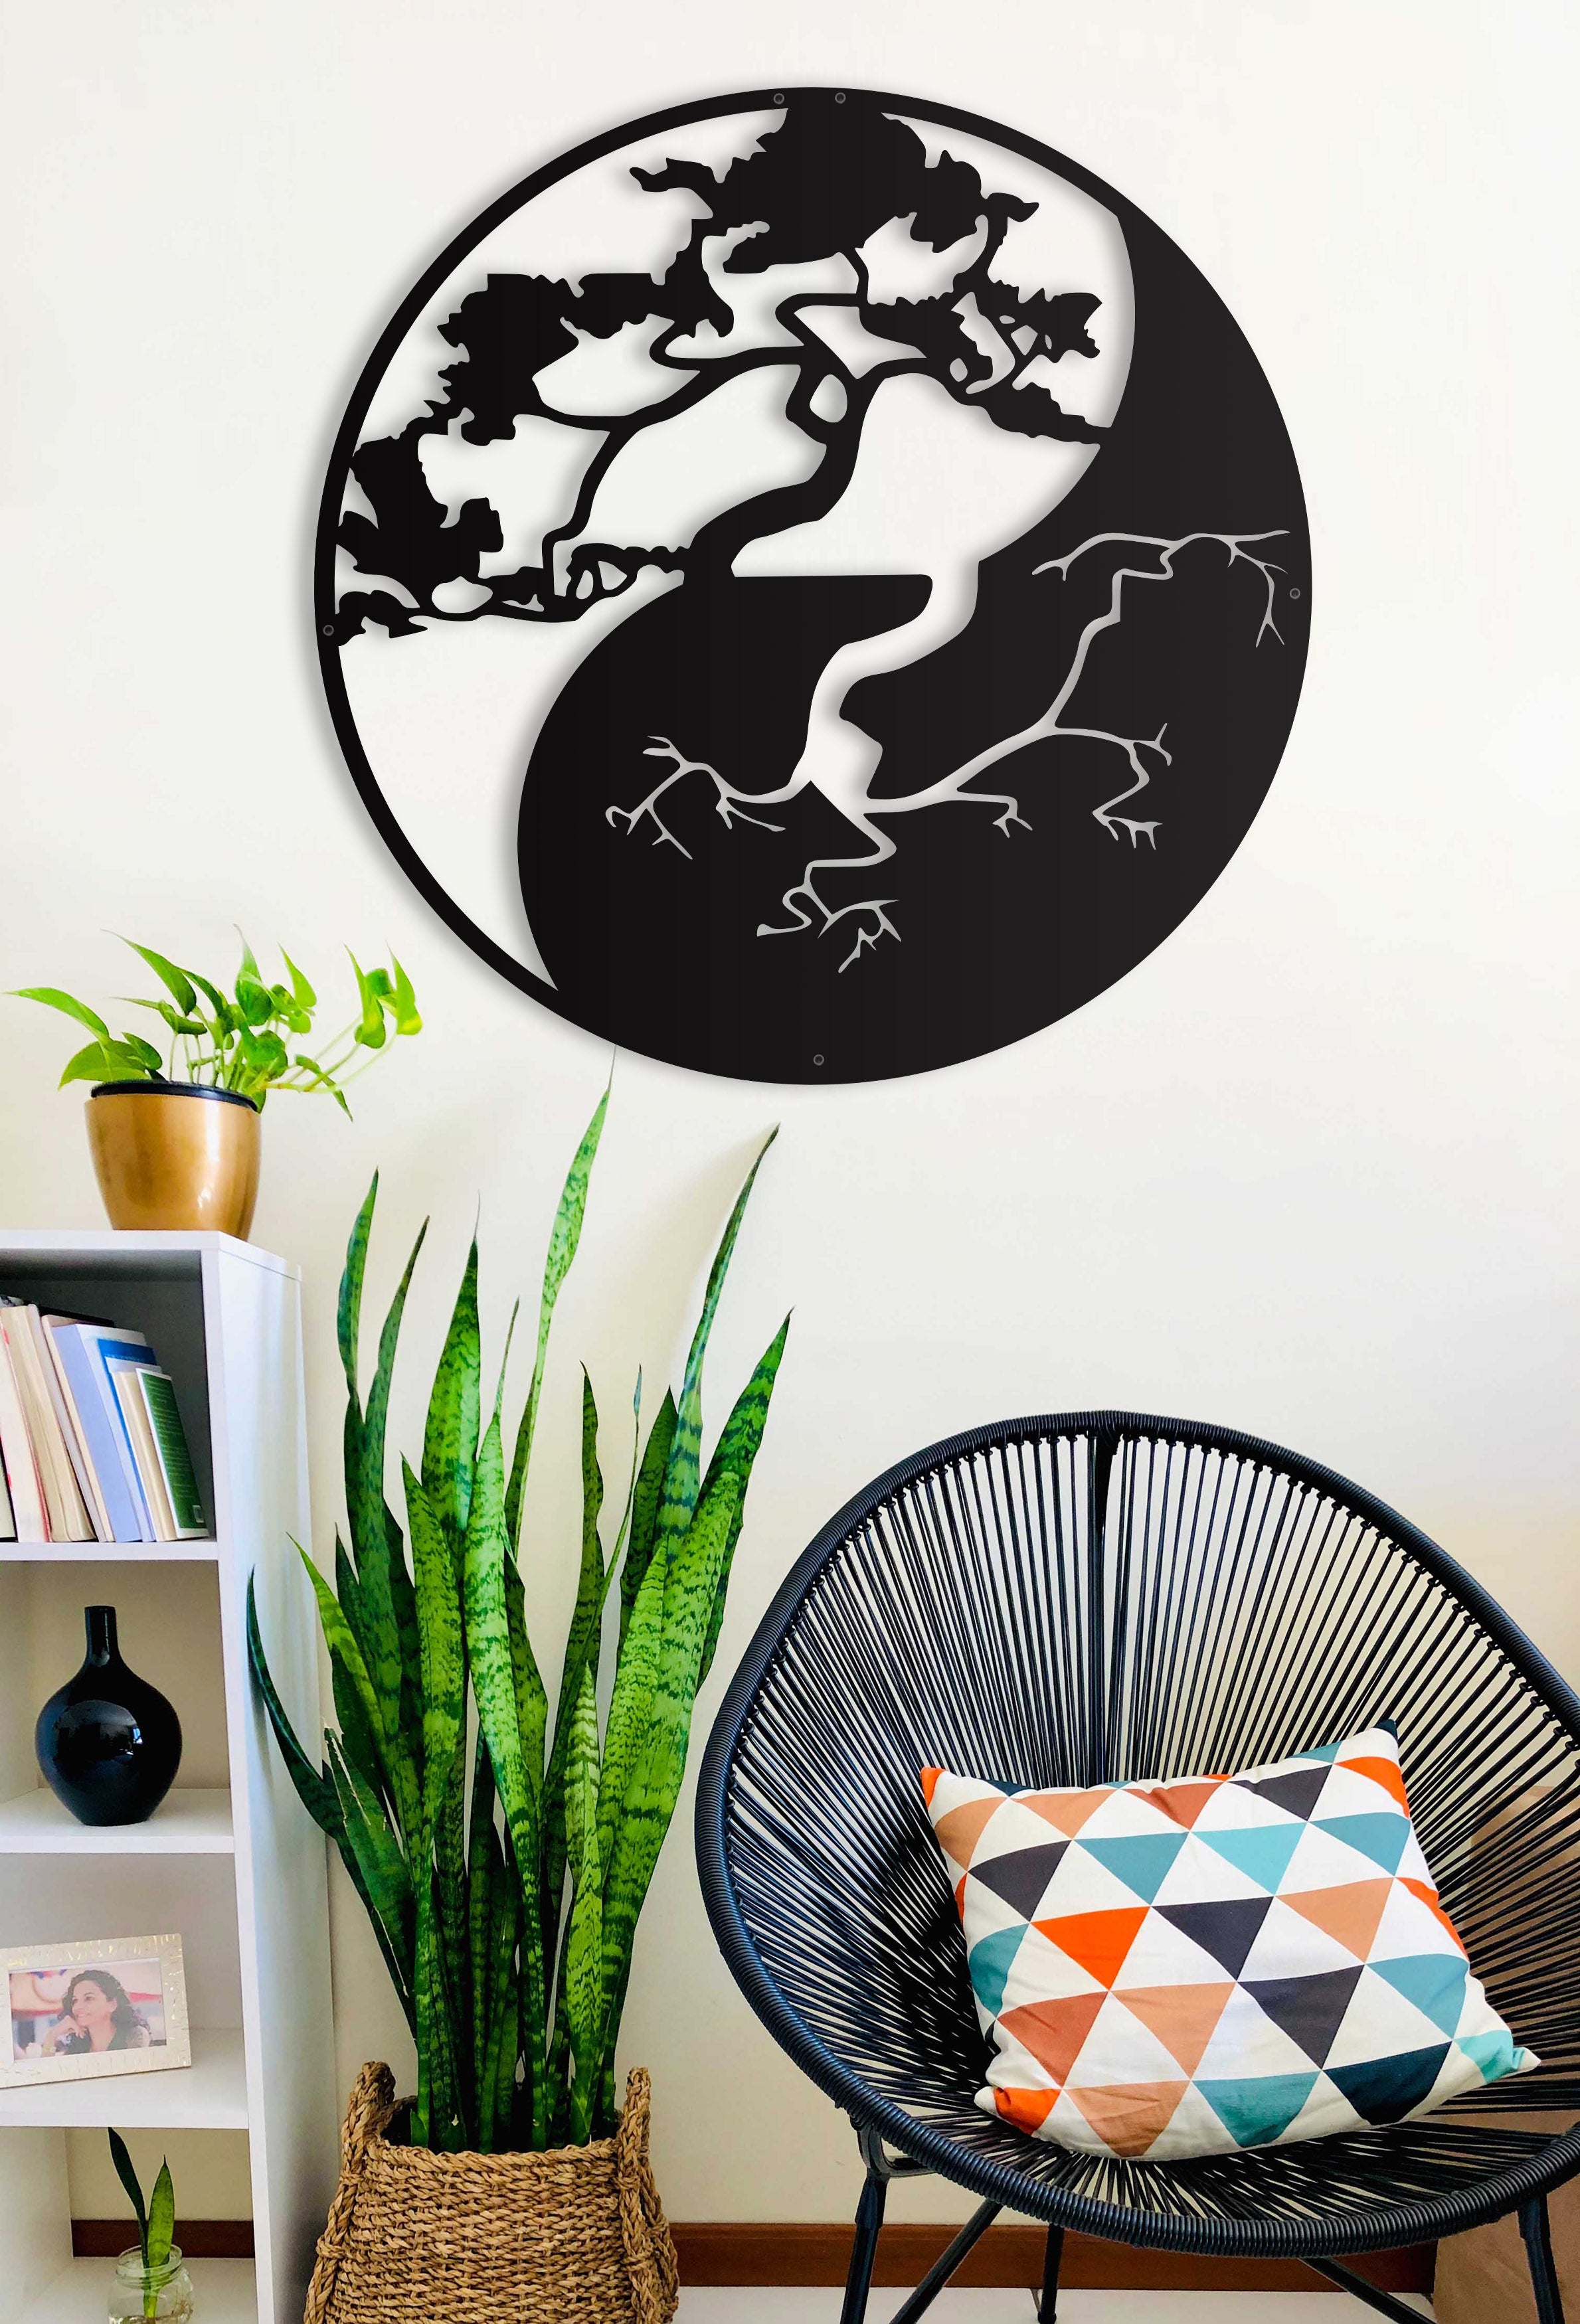 Unique Bonsai Tree Wall Decor/Aesthetic Modern Metal Wall Art/ Gift For Her New Home Gift House Black Living Room Wall Decor